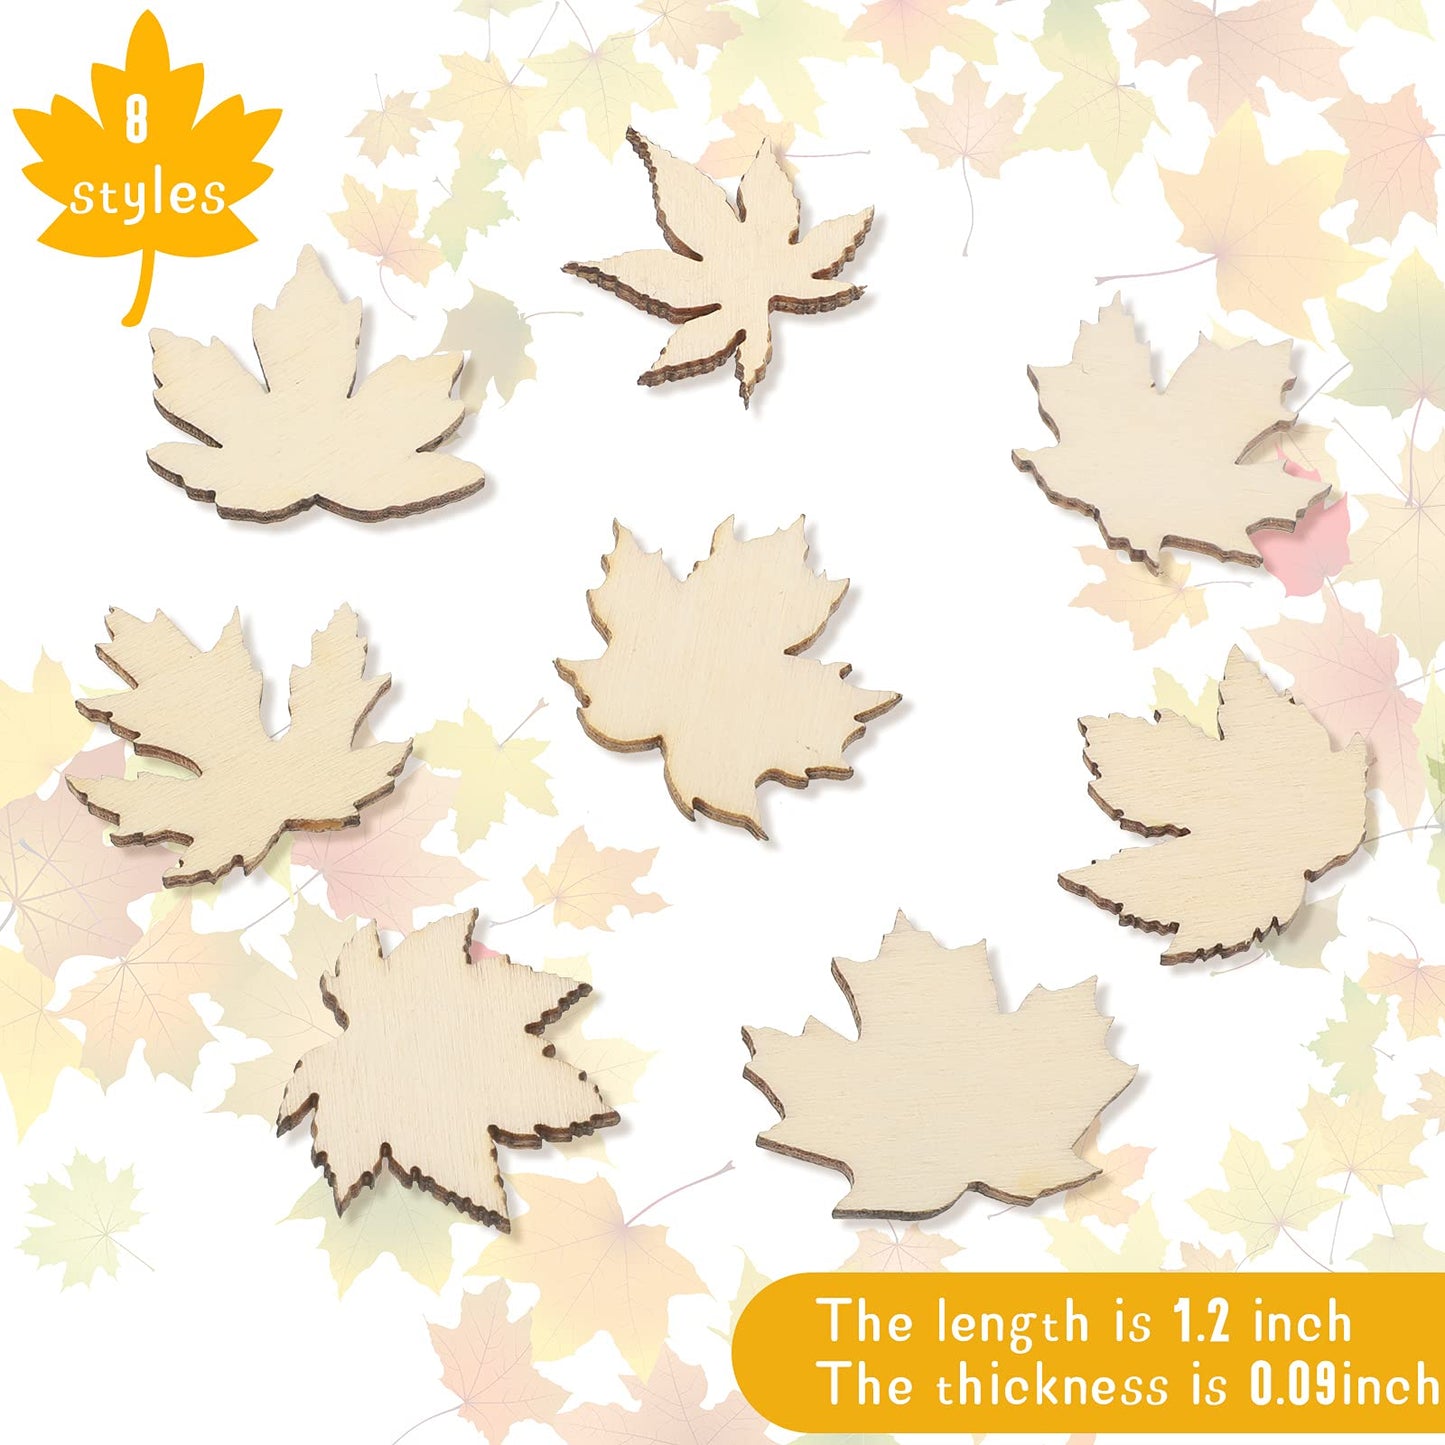 80 Pieces Wooden Maple Leaf Cutout Unfinished Blank Wooden Maple Leaf Slice Maple Leaf Shaped Wood Pieces 1.2 Inch Mini Wooden Maple Leaf Ornament